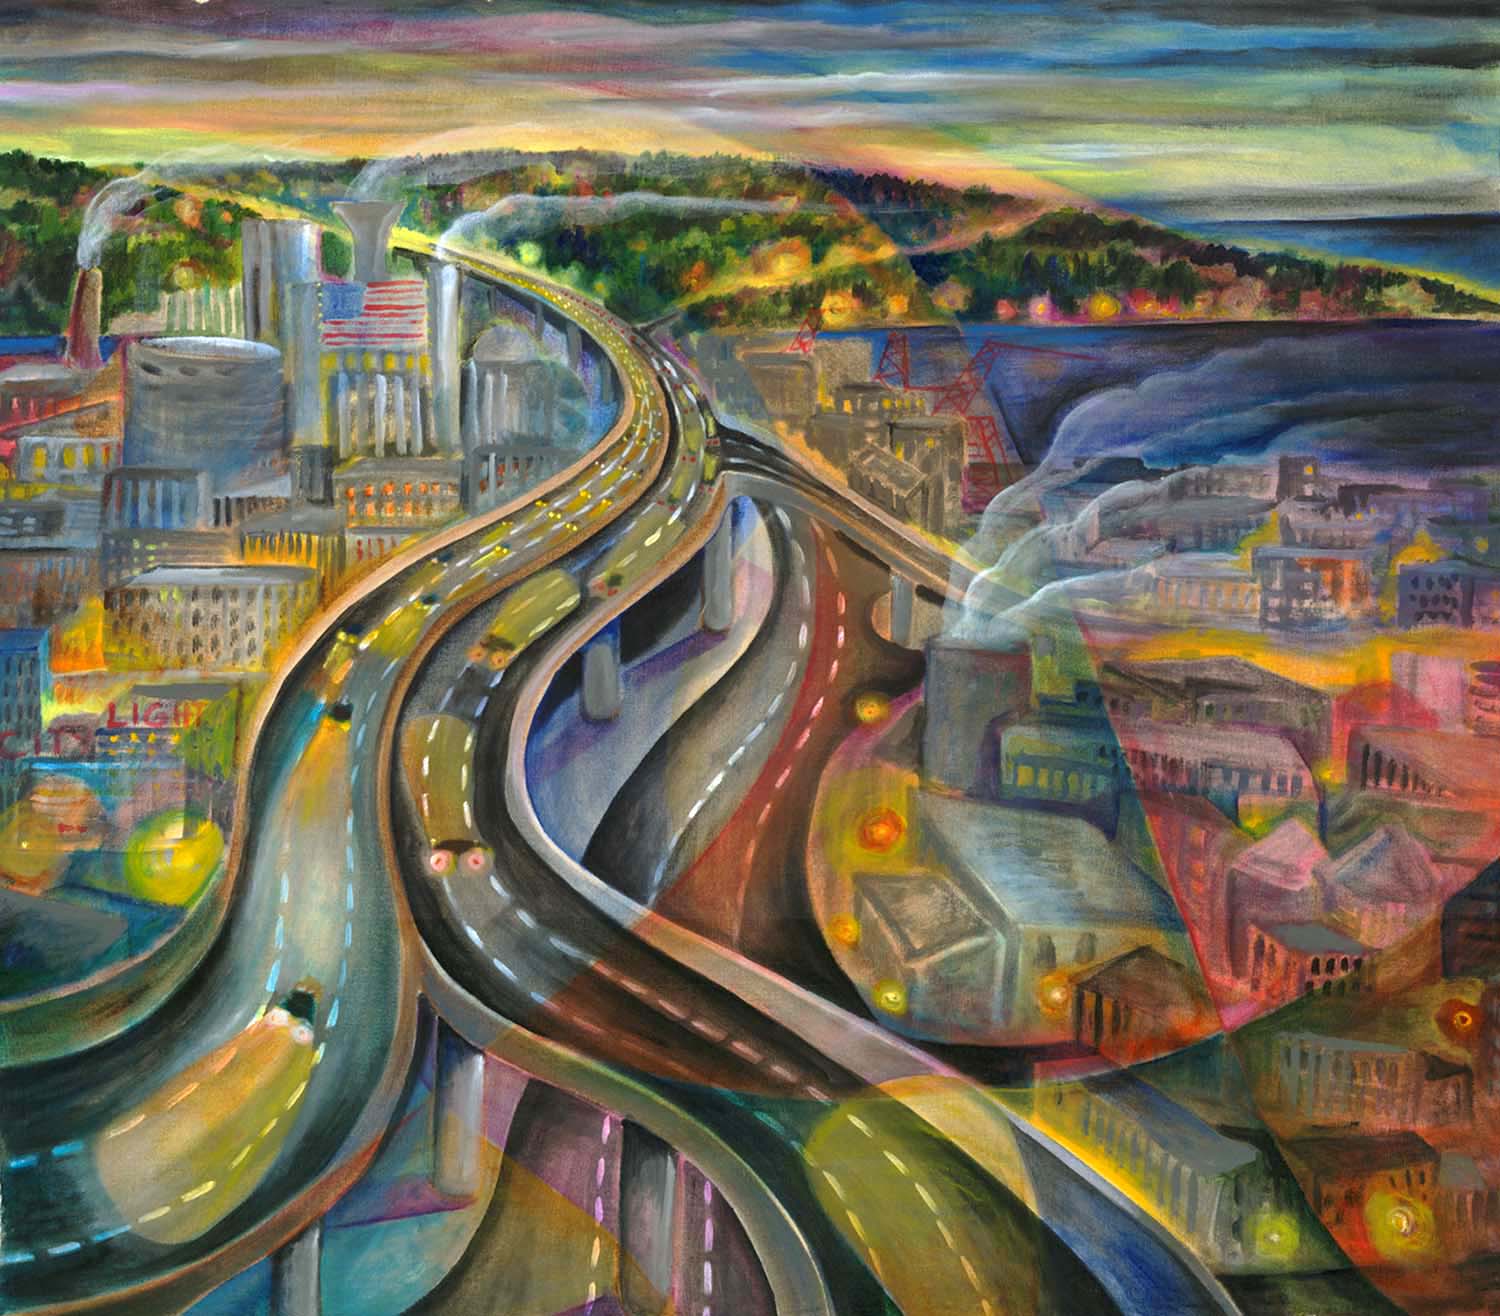  "West Seattle Viaduct", acrylic on canvas, 32"x28", 2004 